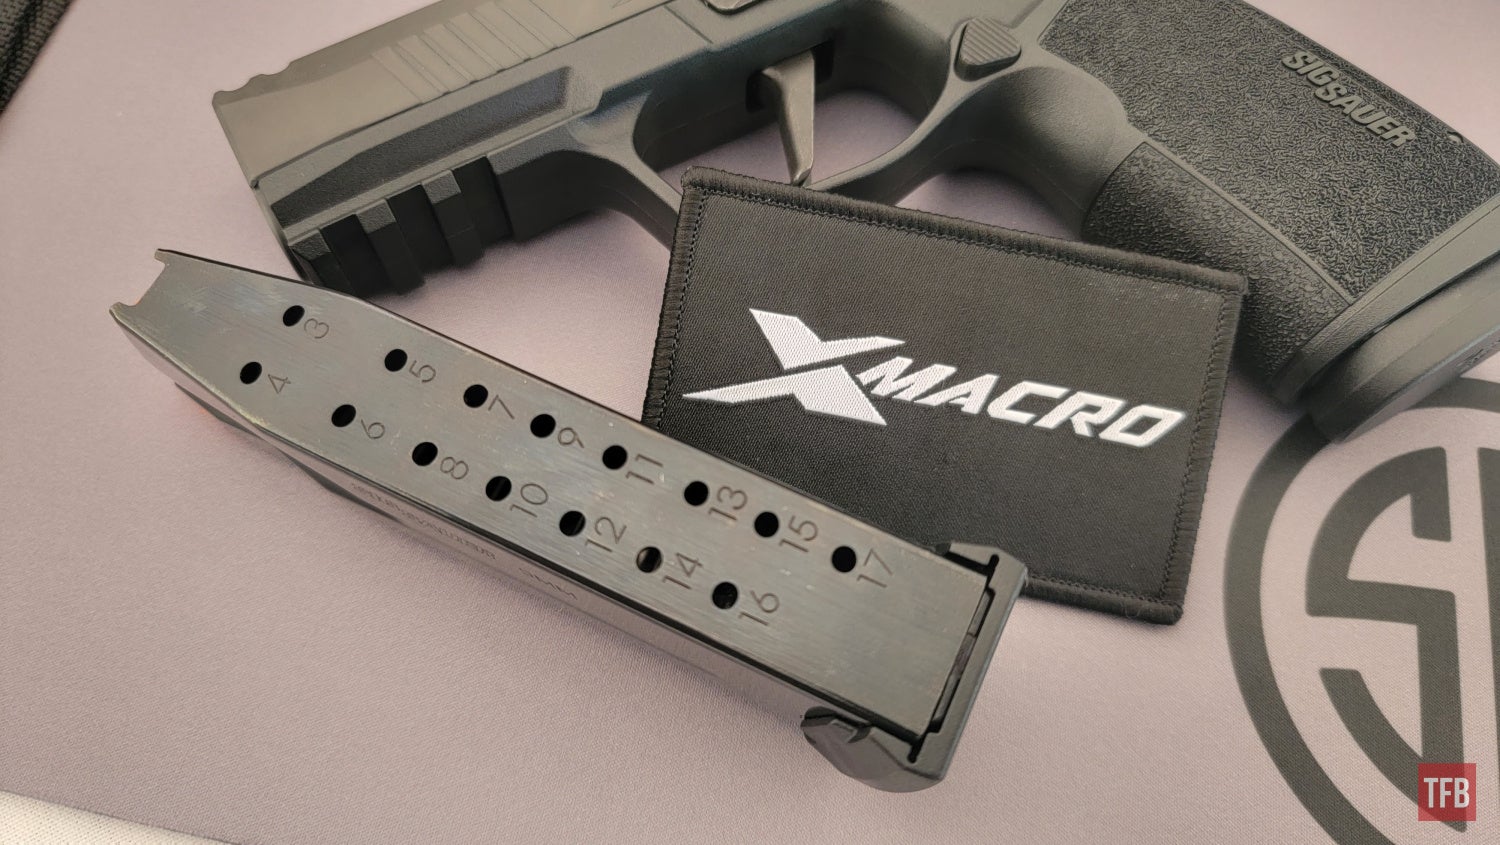 The NEW 17-Round Capacity Compensated SIG P365 X-Macro